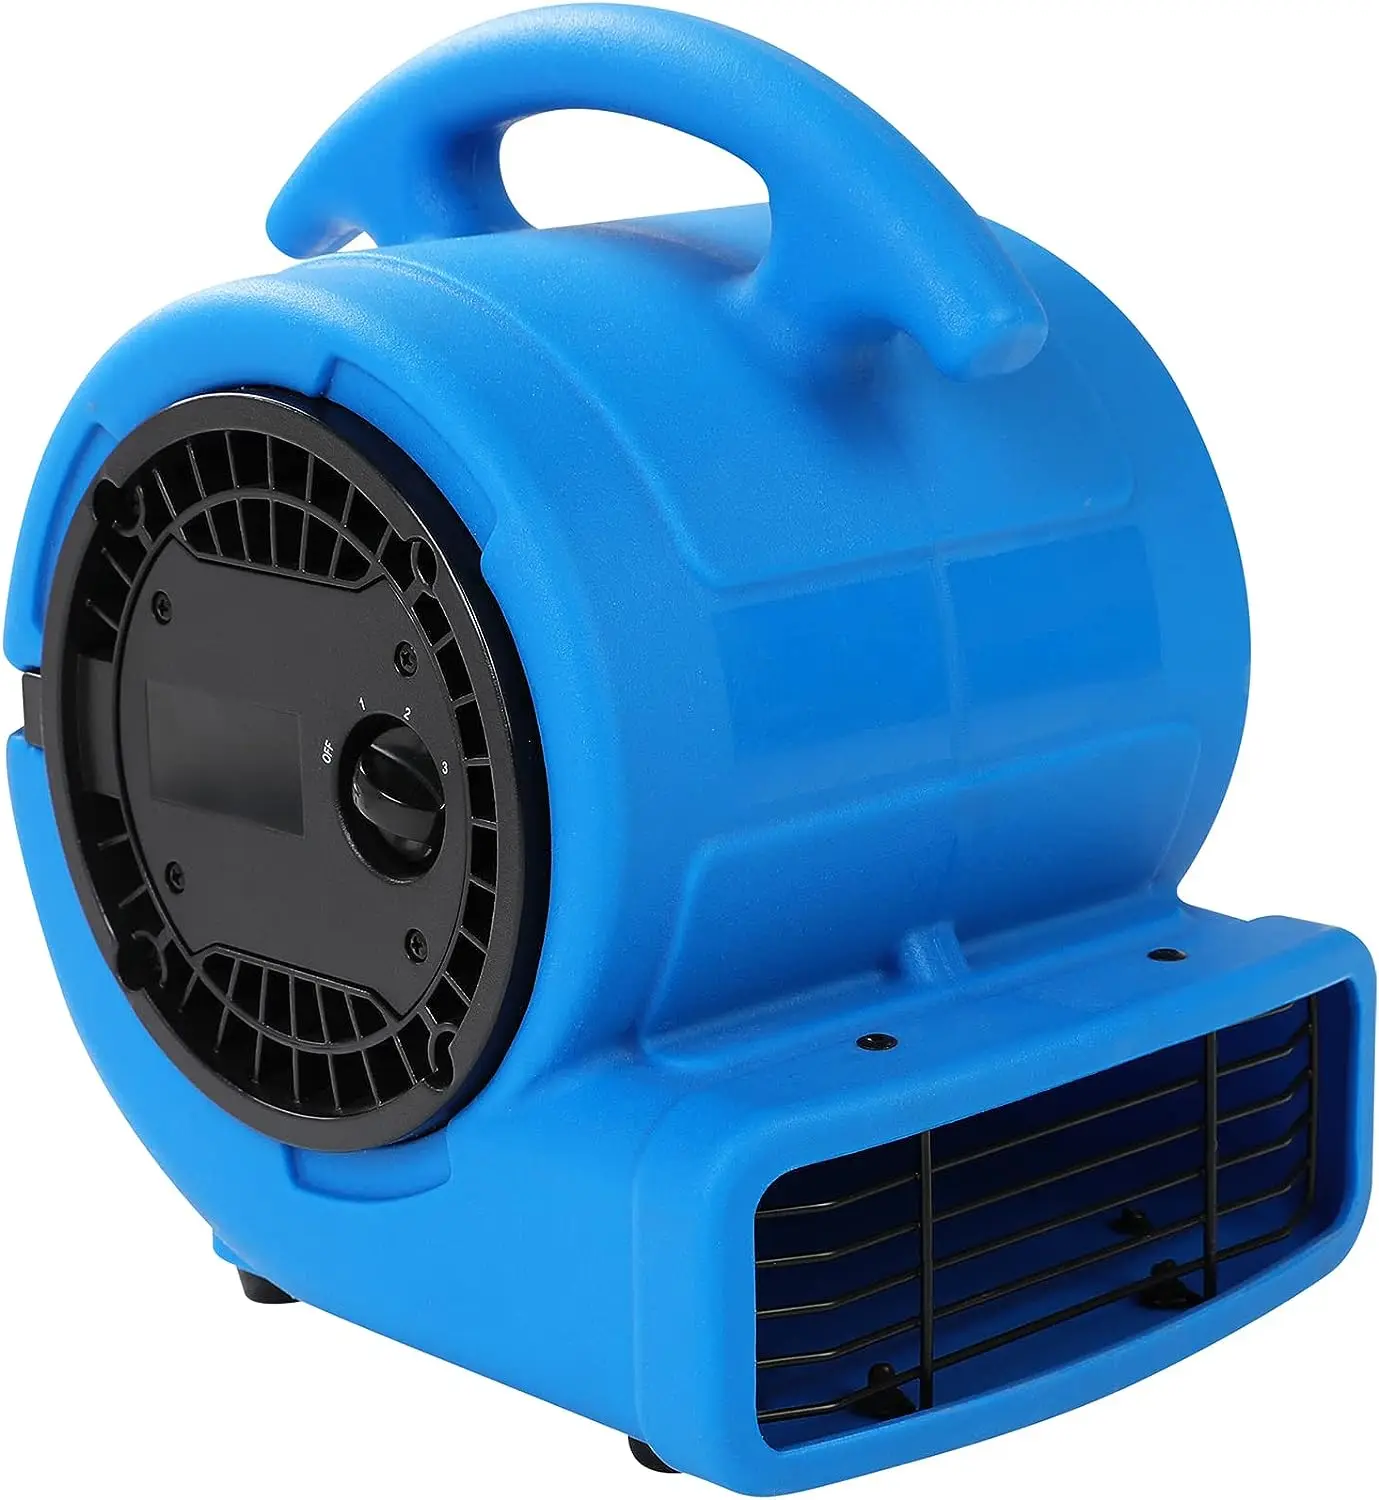 

1/8HP 600cfm Air Mover Floor Dryer Utality Fan Blower Glasses cleaner Color contact lens Portable washing machine Mini washing m